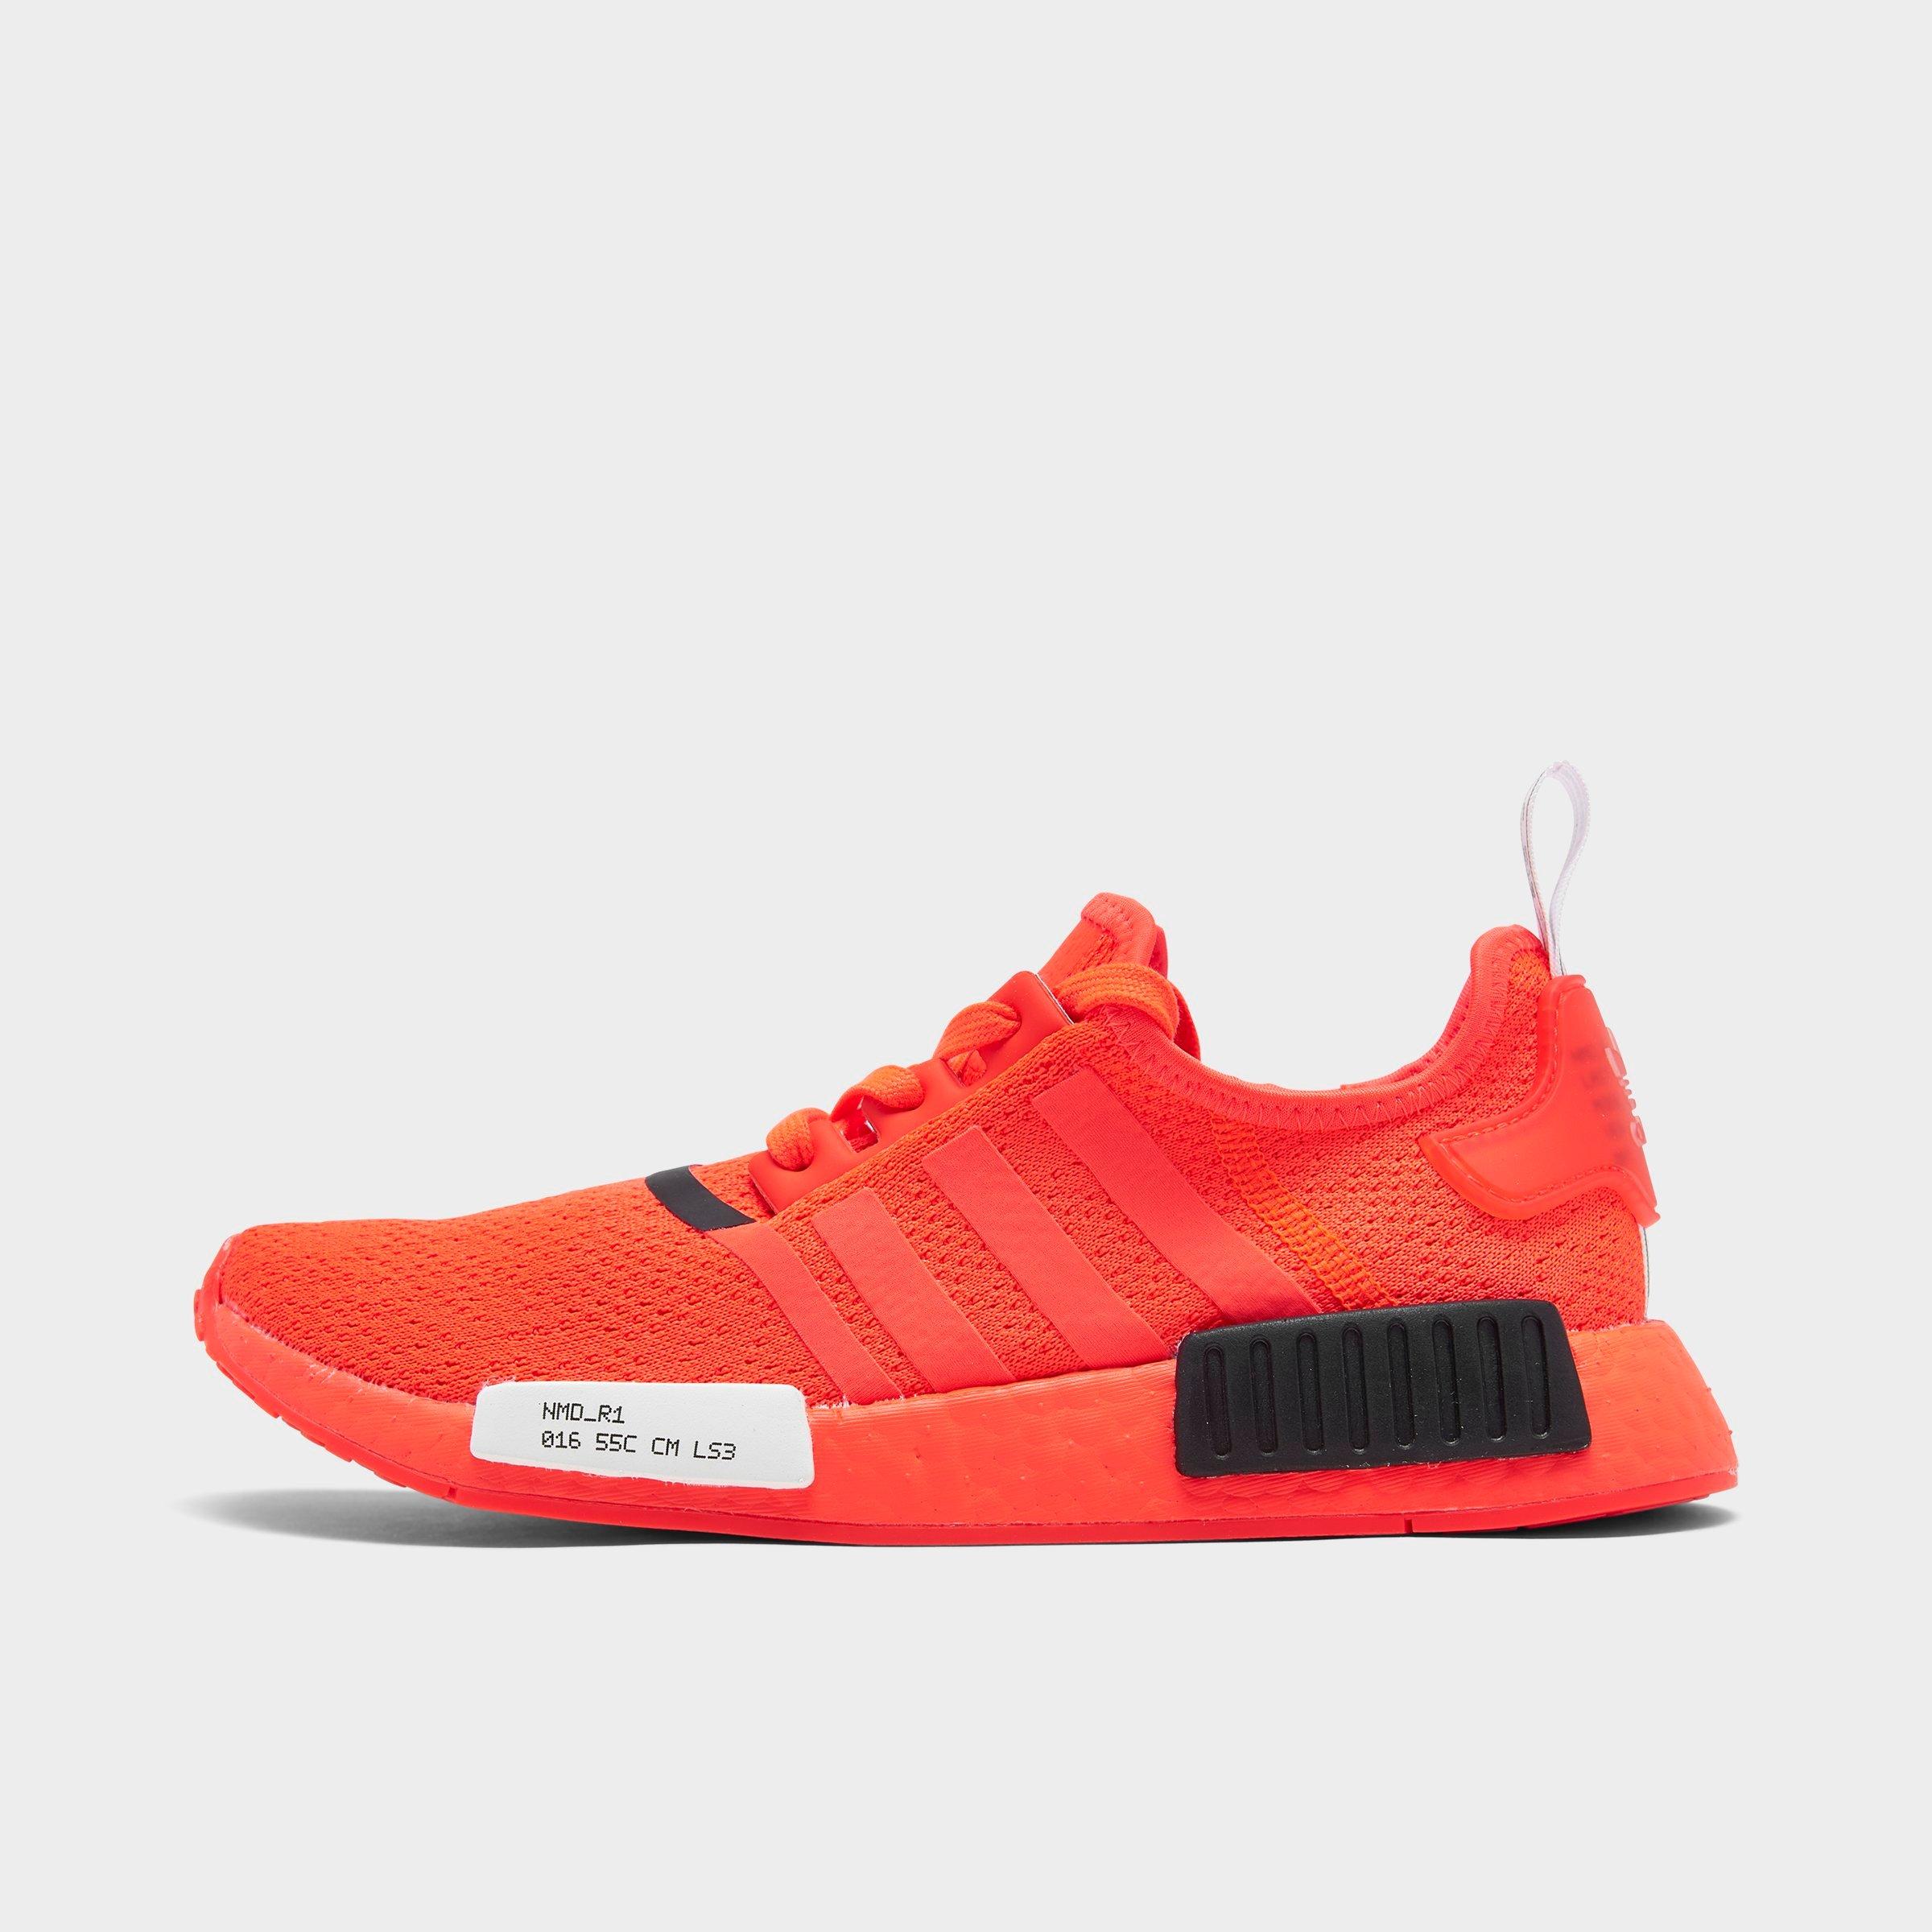 nmd r1 core black solar red line